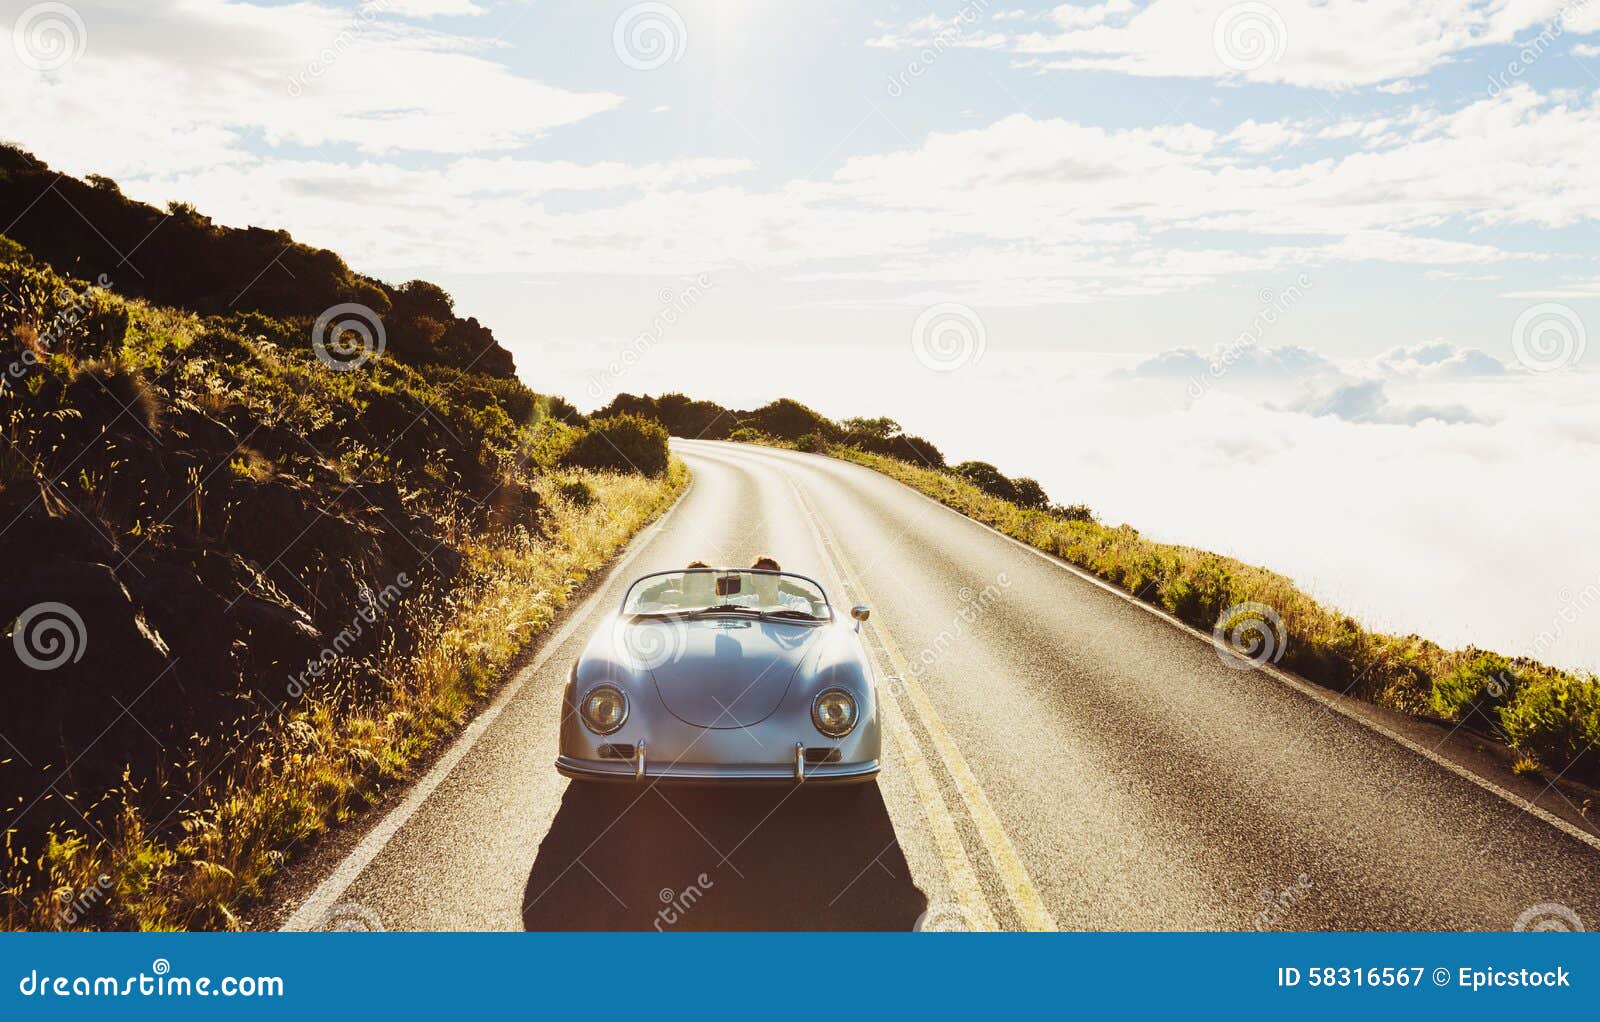 coupe driving on country road in vintage sports car